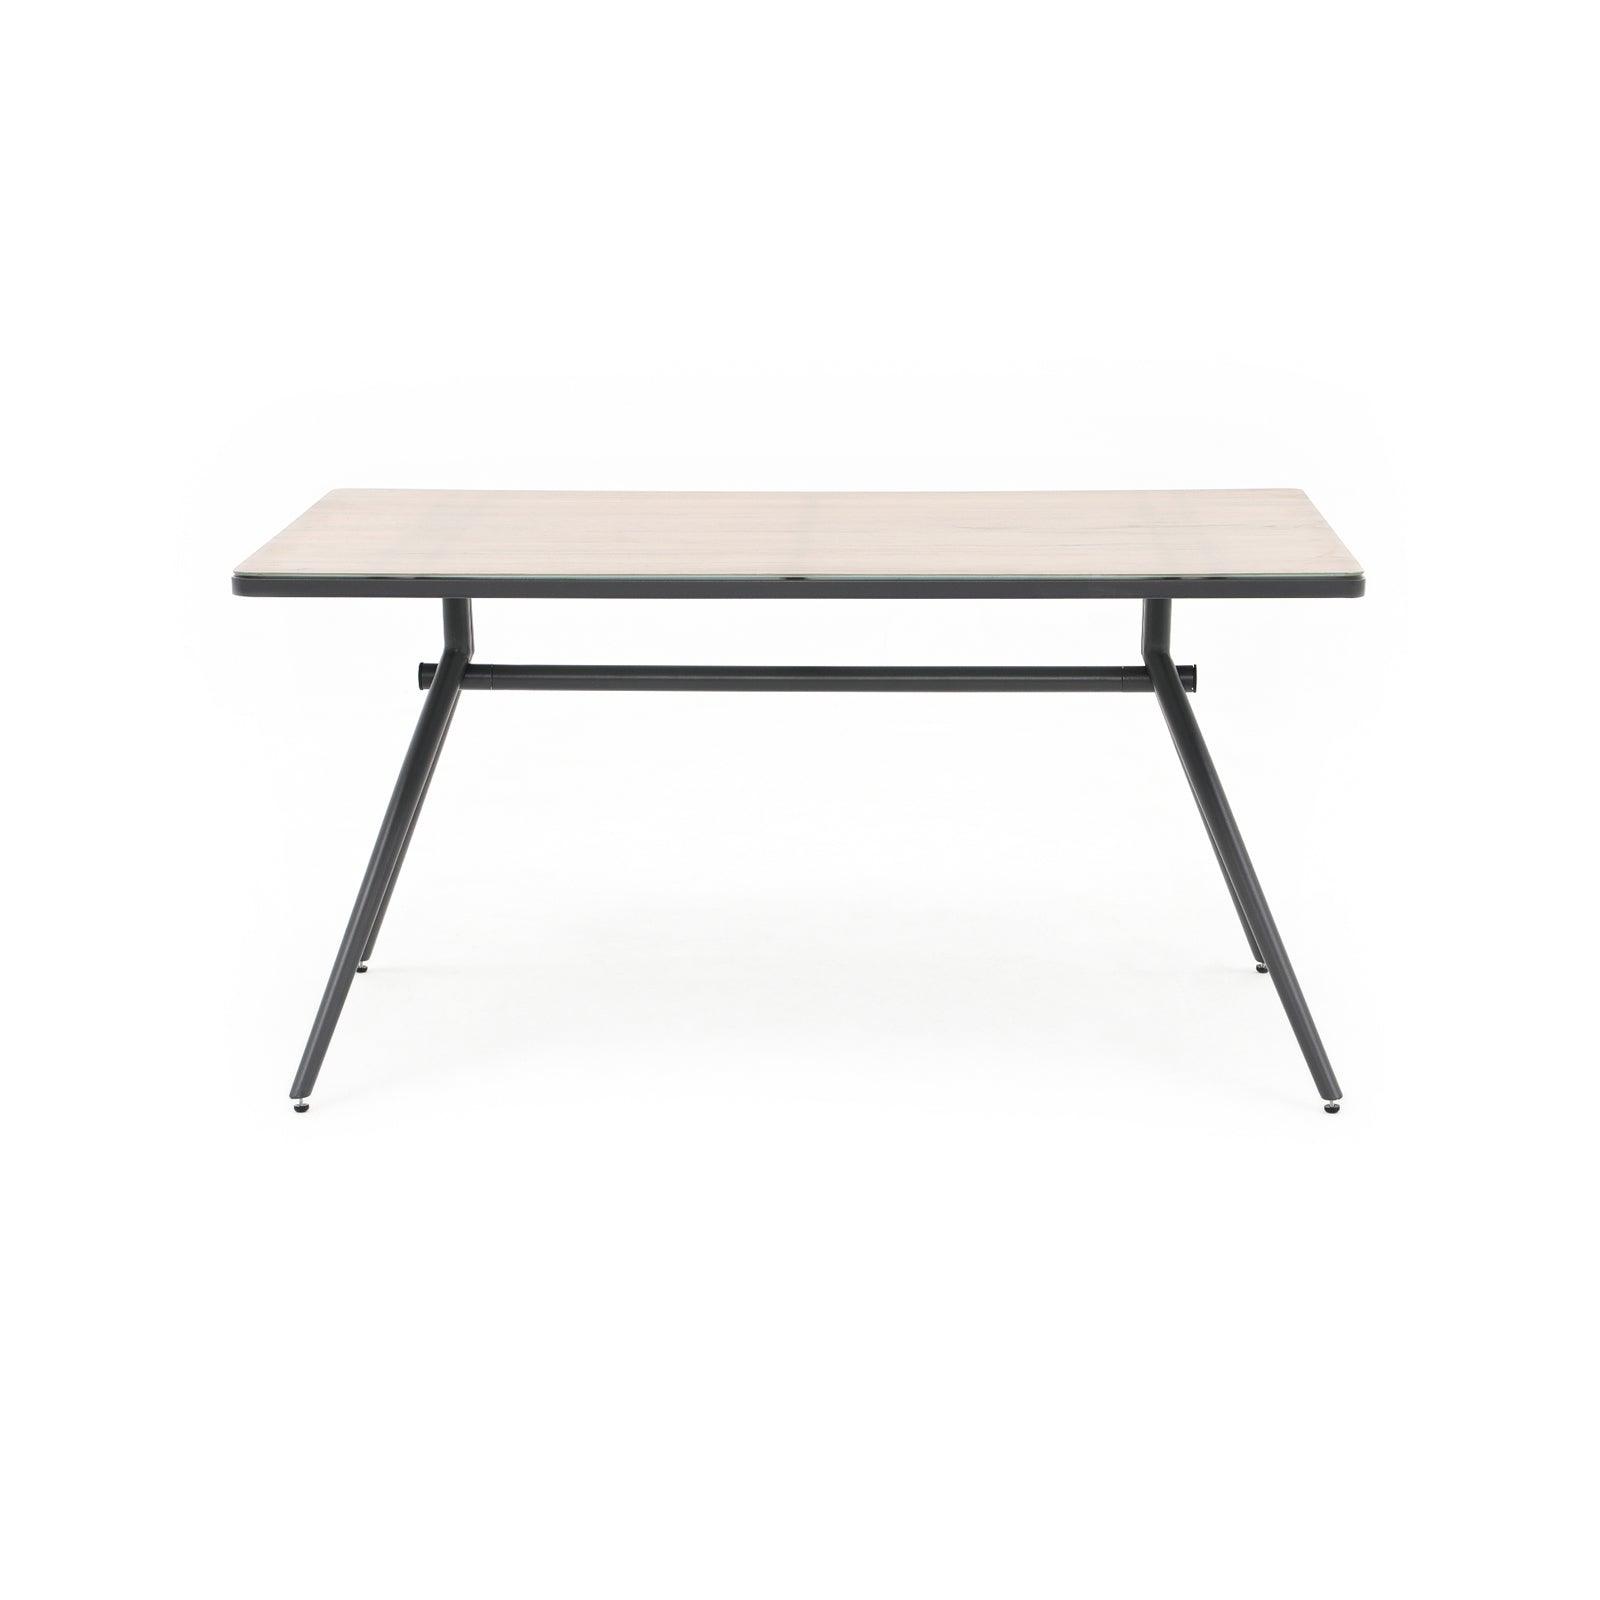 Hallerbos Rectangular Dining Table with steel frame and tempered glass top table - Jardina Furniture